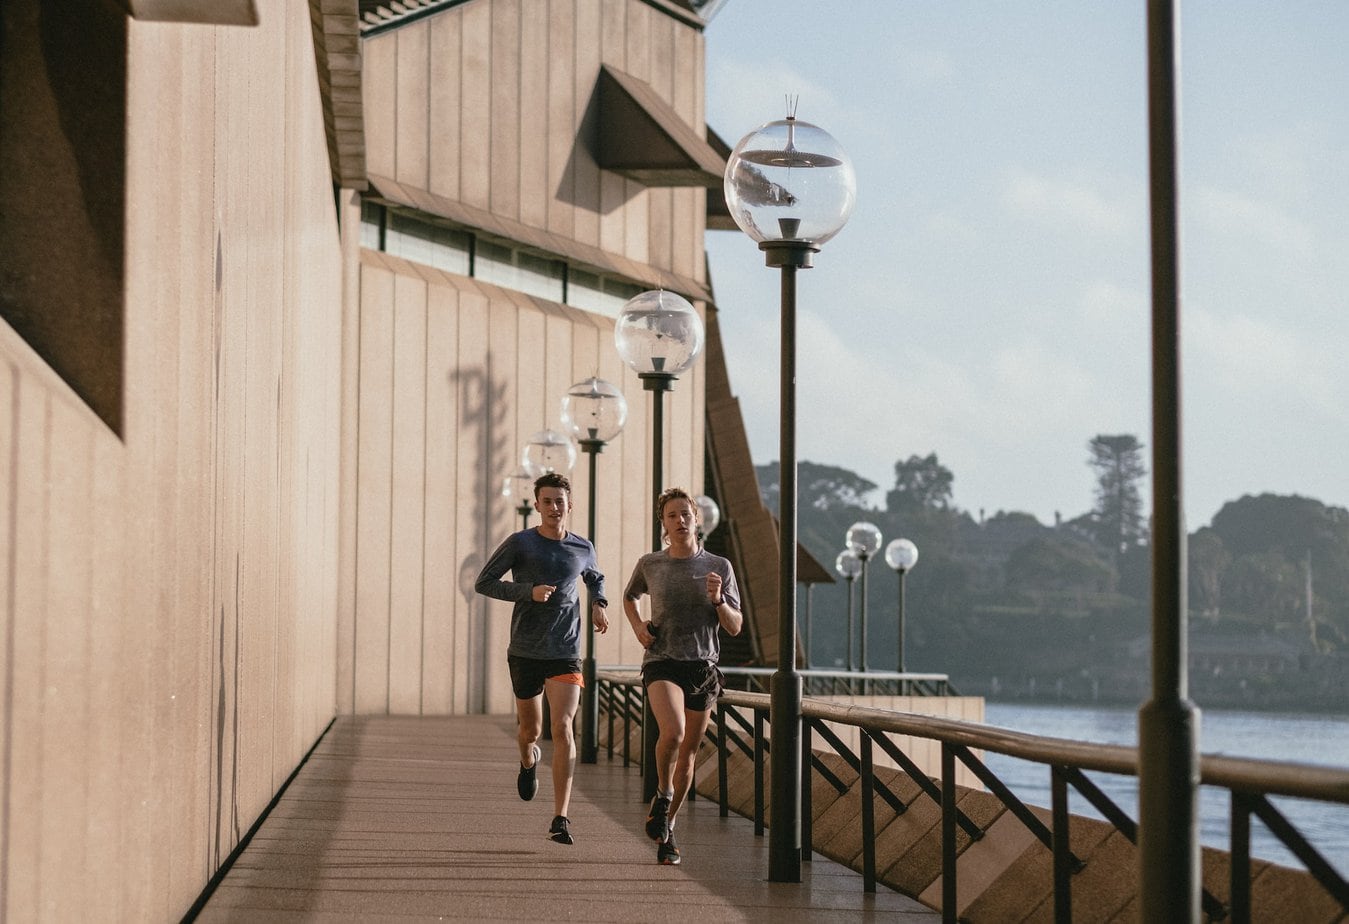 Jogging in the summer – what should you keep in mind?